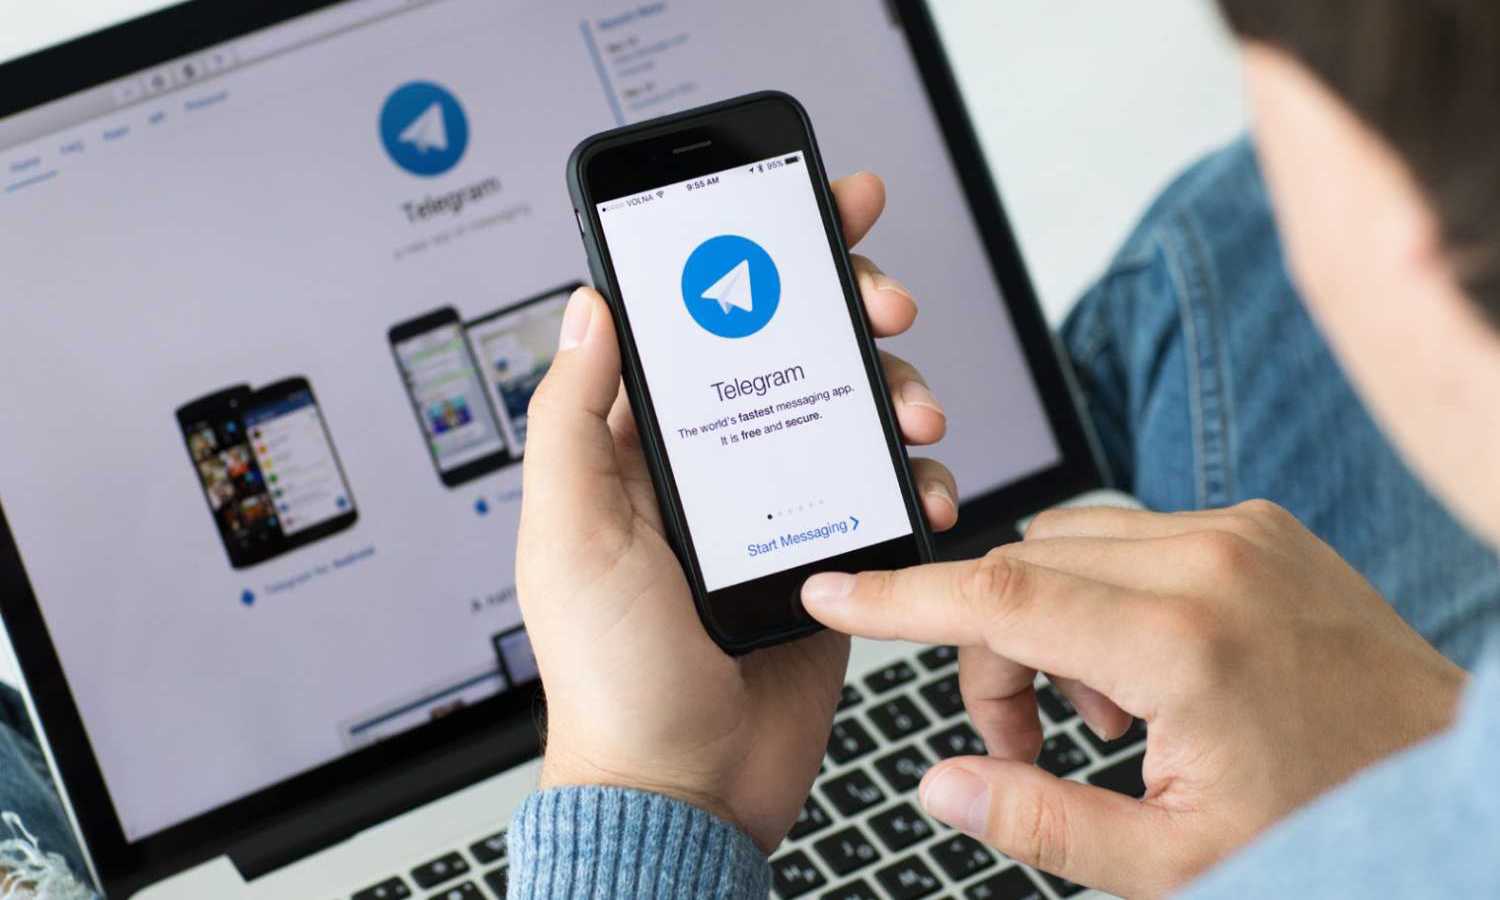 How to develop an app like Telegram in Singapore?